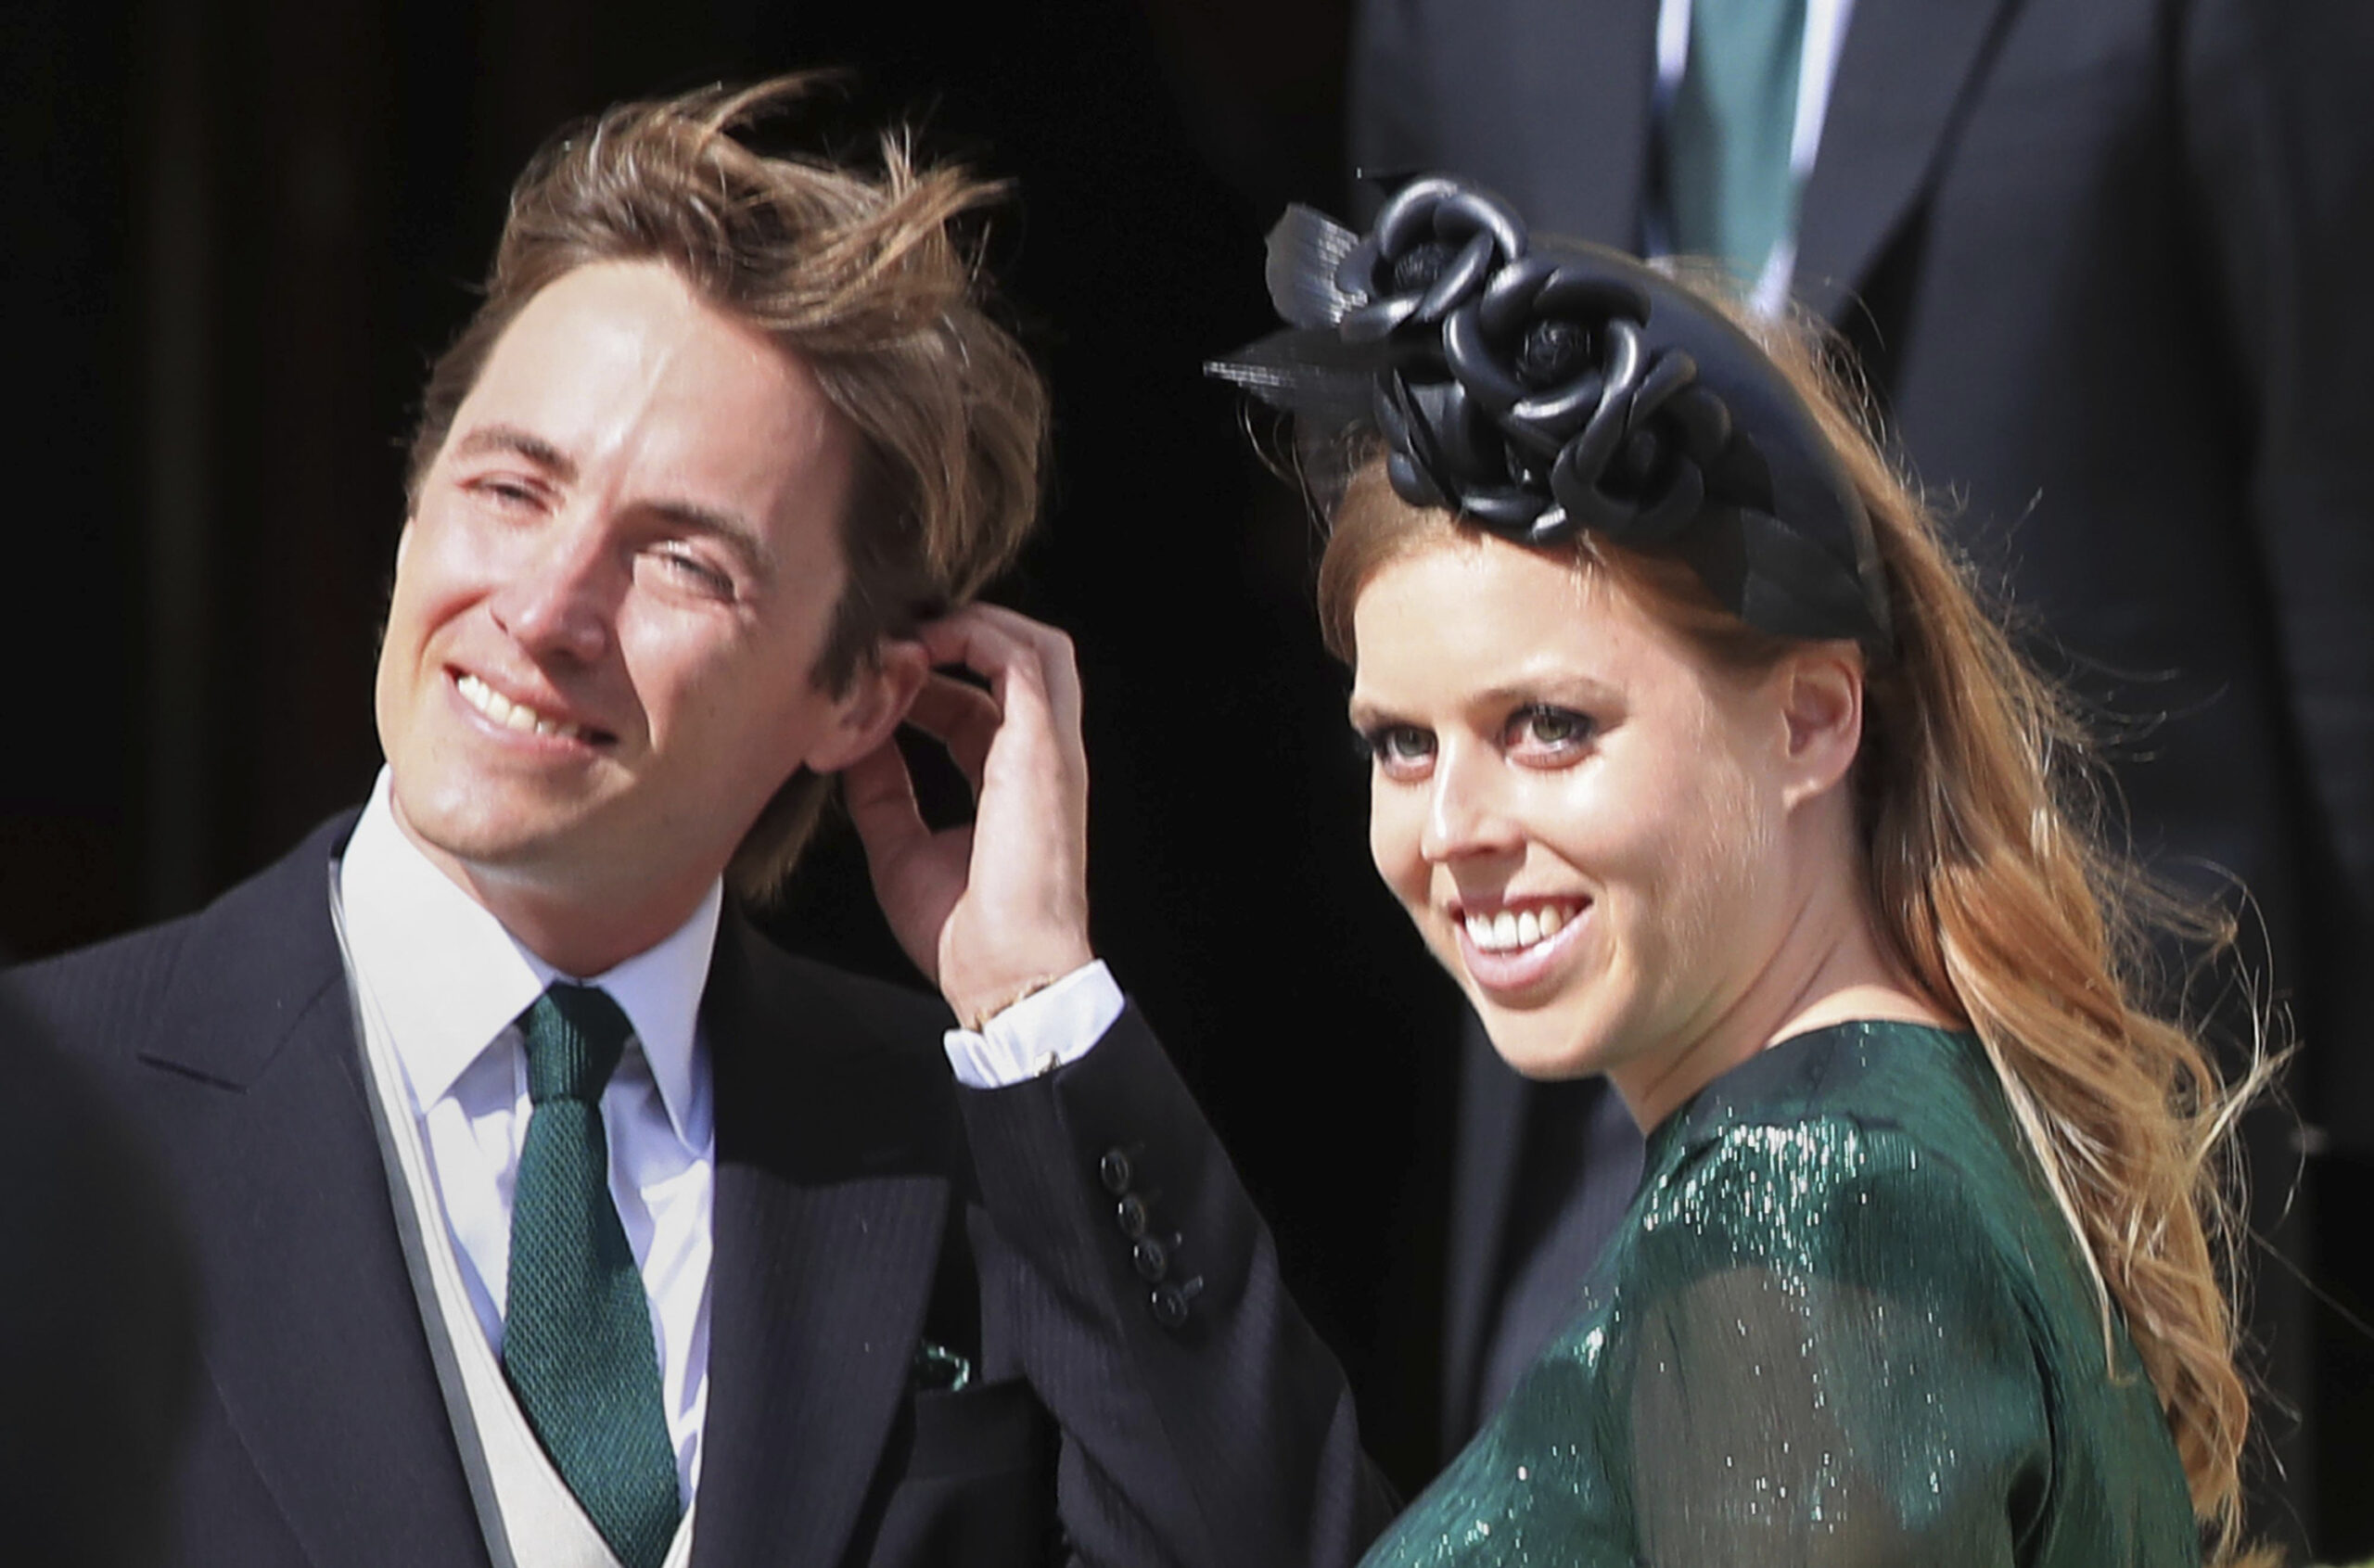 FILE - In this Aug. 31, 2019 file photo, Princess Beatrice and her husband Edoardo Mapelli Mozzi attend the wedding of Ellie Goulding and Caspar Jopling, in York, England. Princess Beatrice and her husband Edoardo Mapelli Mozzi announced the birth of a daughter, Buckingham Palace said Monday, Sept. 20, 2021. The baby, who was born on Saturday at London's Chelsea and Westminster Hospital, weighed 6 pounds and 2 ounces (2.78 kilos). Her name was not immediately revealed. (Peter Byrne/PA via AP, File)